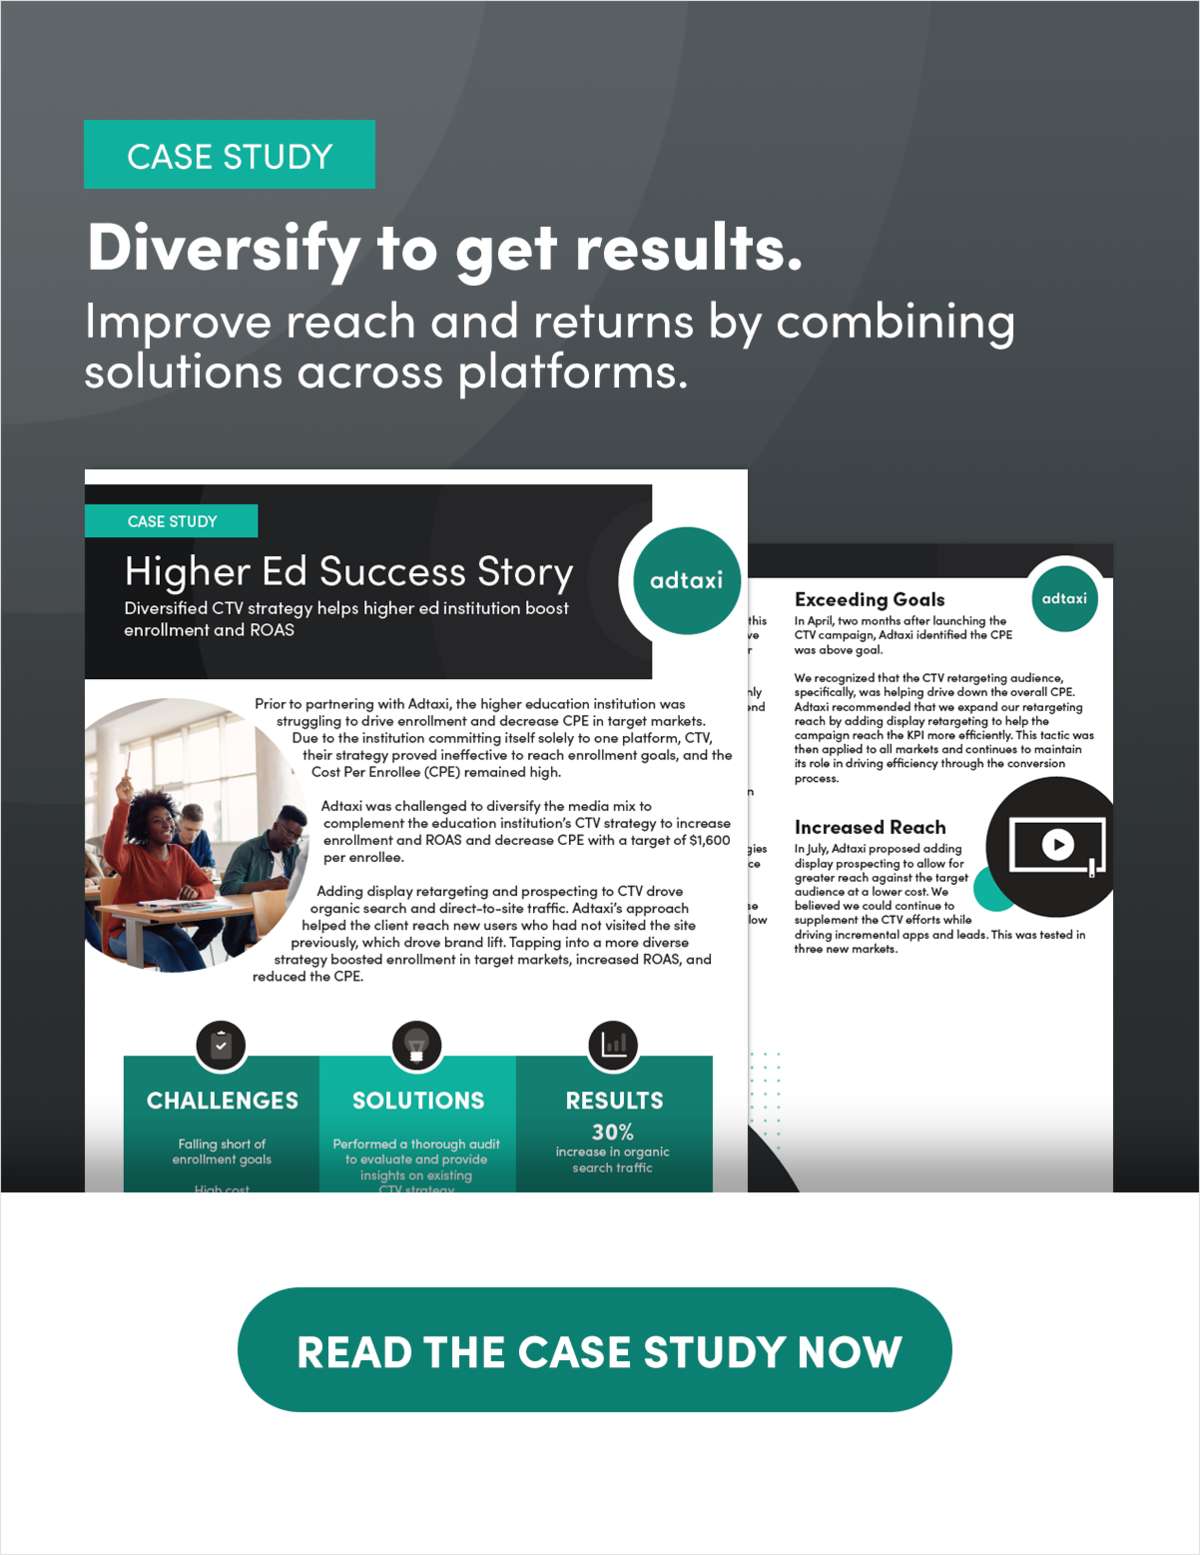 Higher Ed Success Story: Diversified CTV strategy helps higher education institution boost enrollment and ROAS